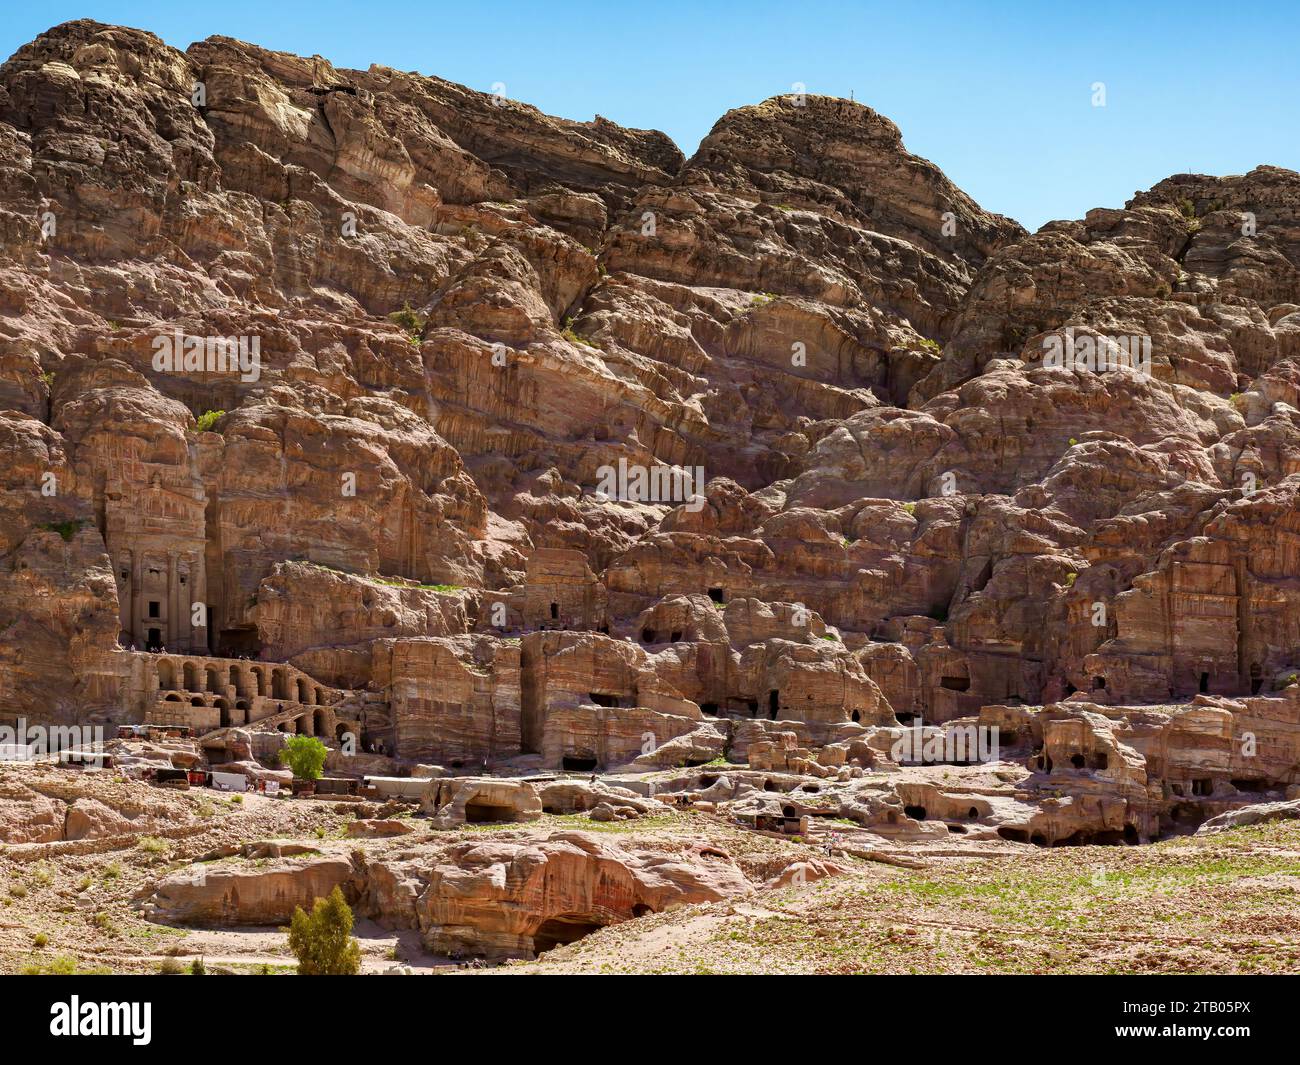 Royal Tombs, Petra Archaeological Park, a UNESCO World Heritage Site, one of the 7 New Wonders of the World, Jordan. Stock Photo